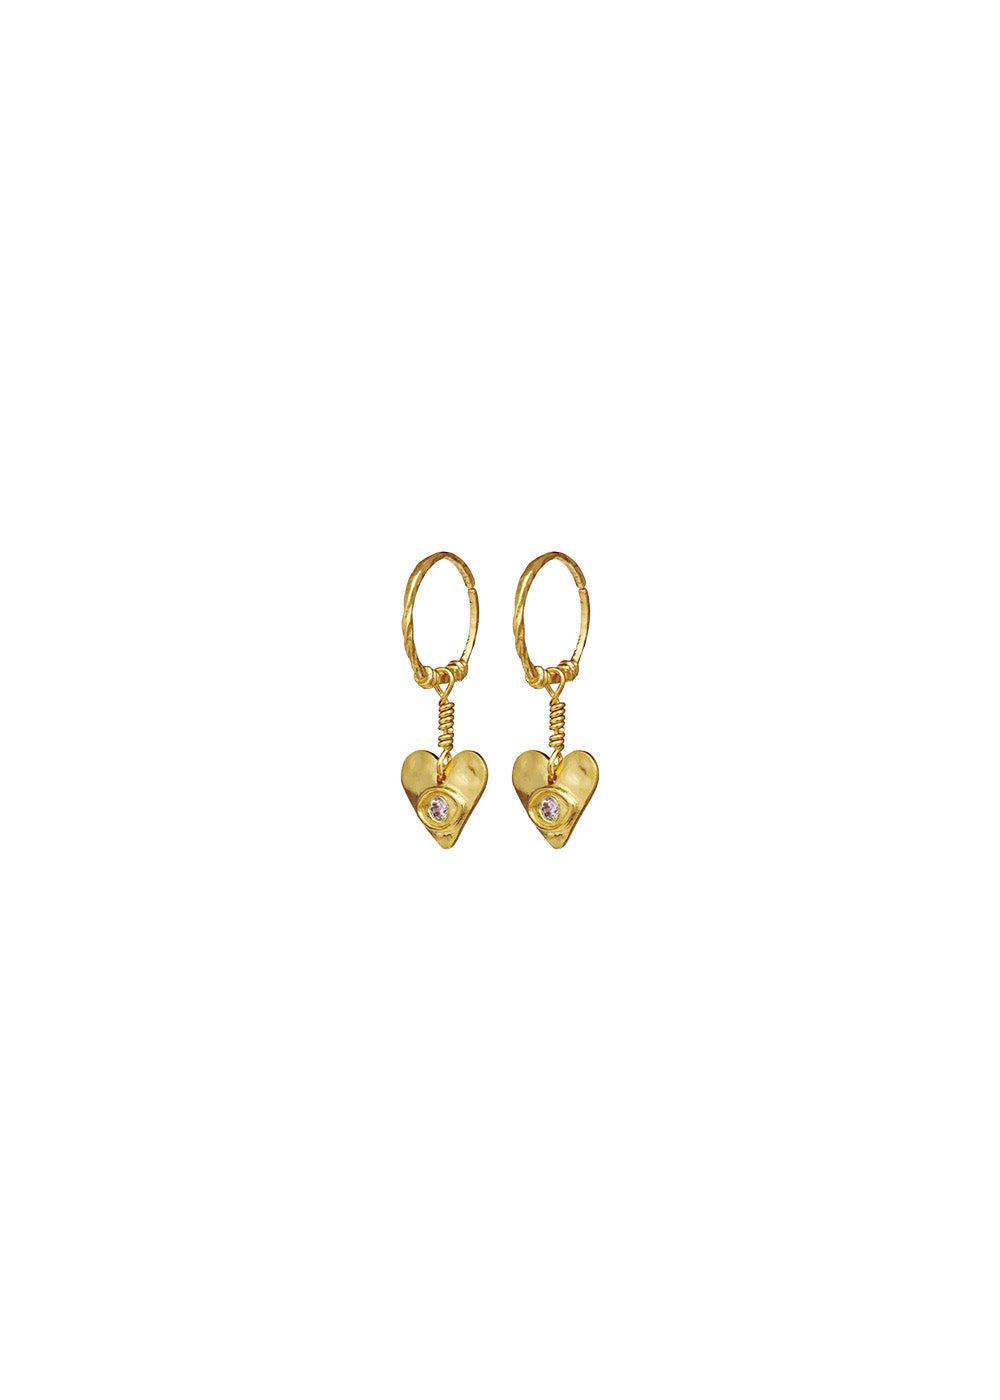 Hestia Earring - Sterling Silver (925) Gold Plated